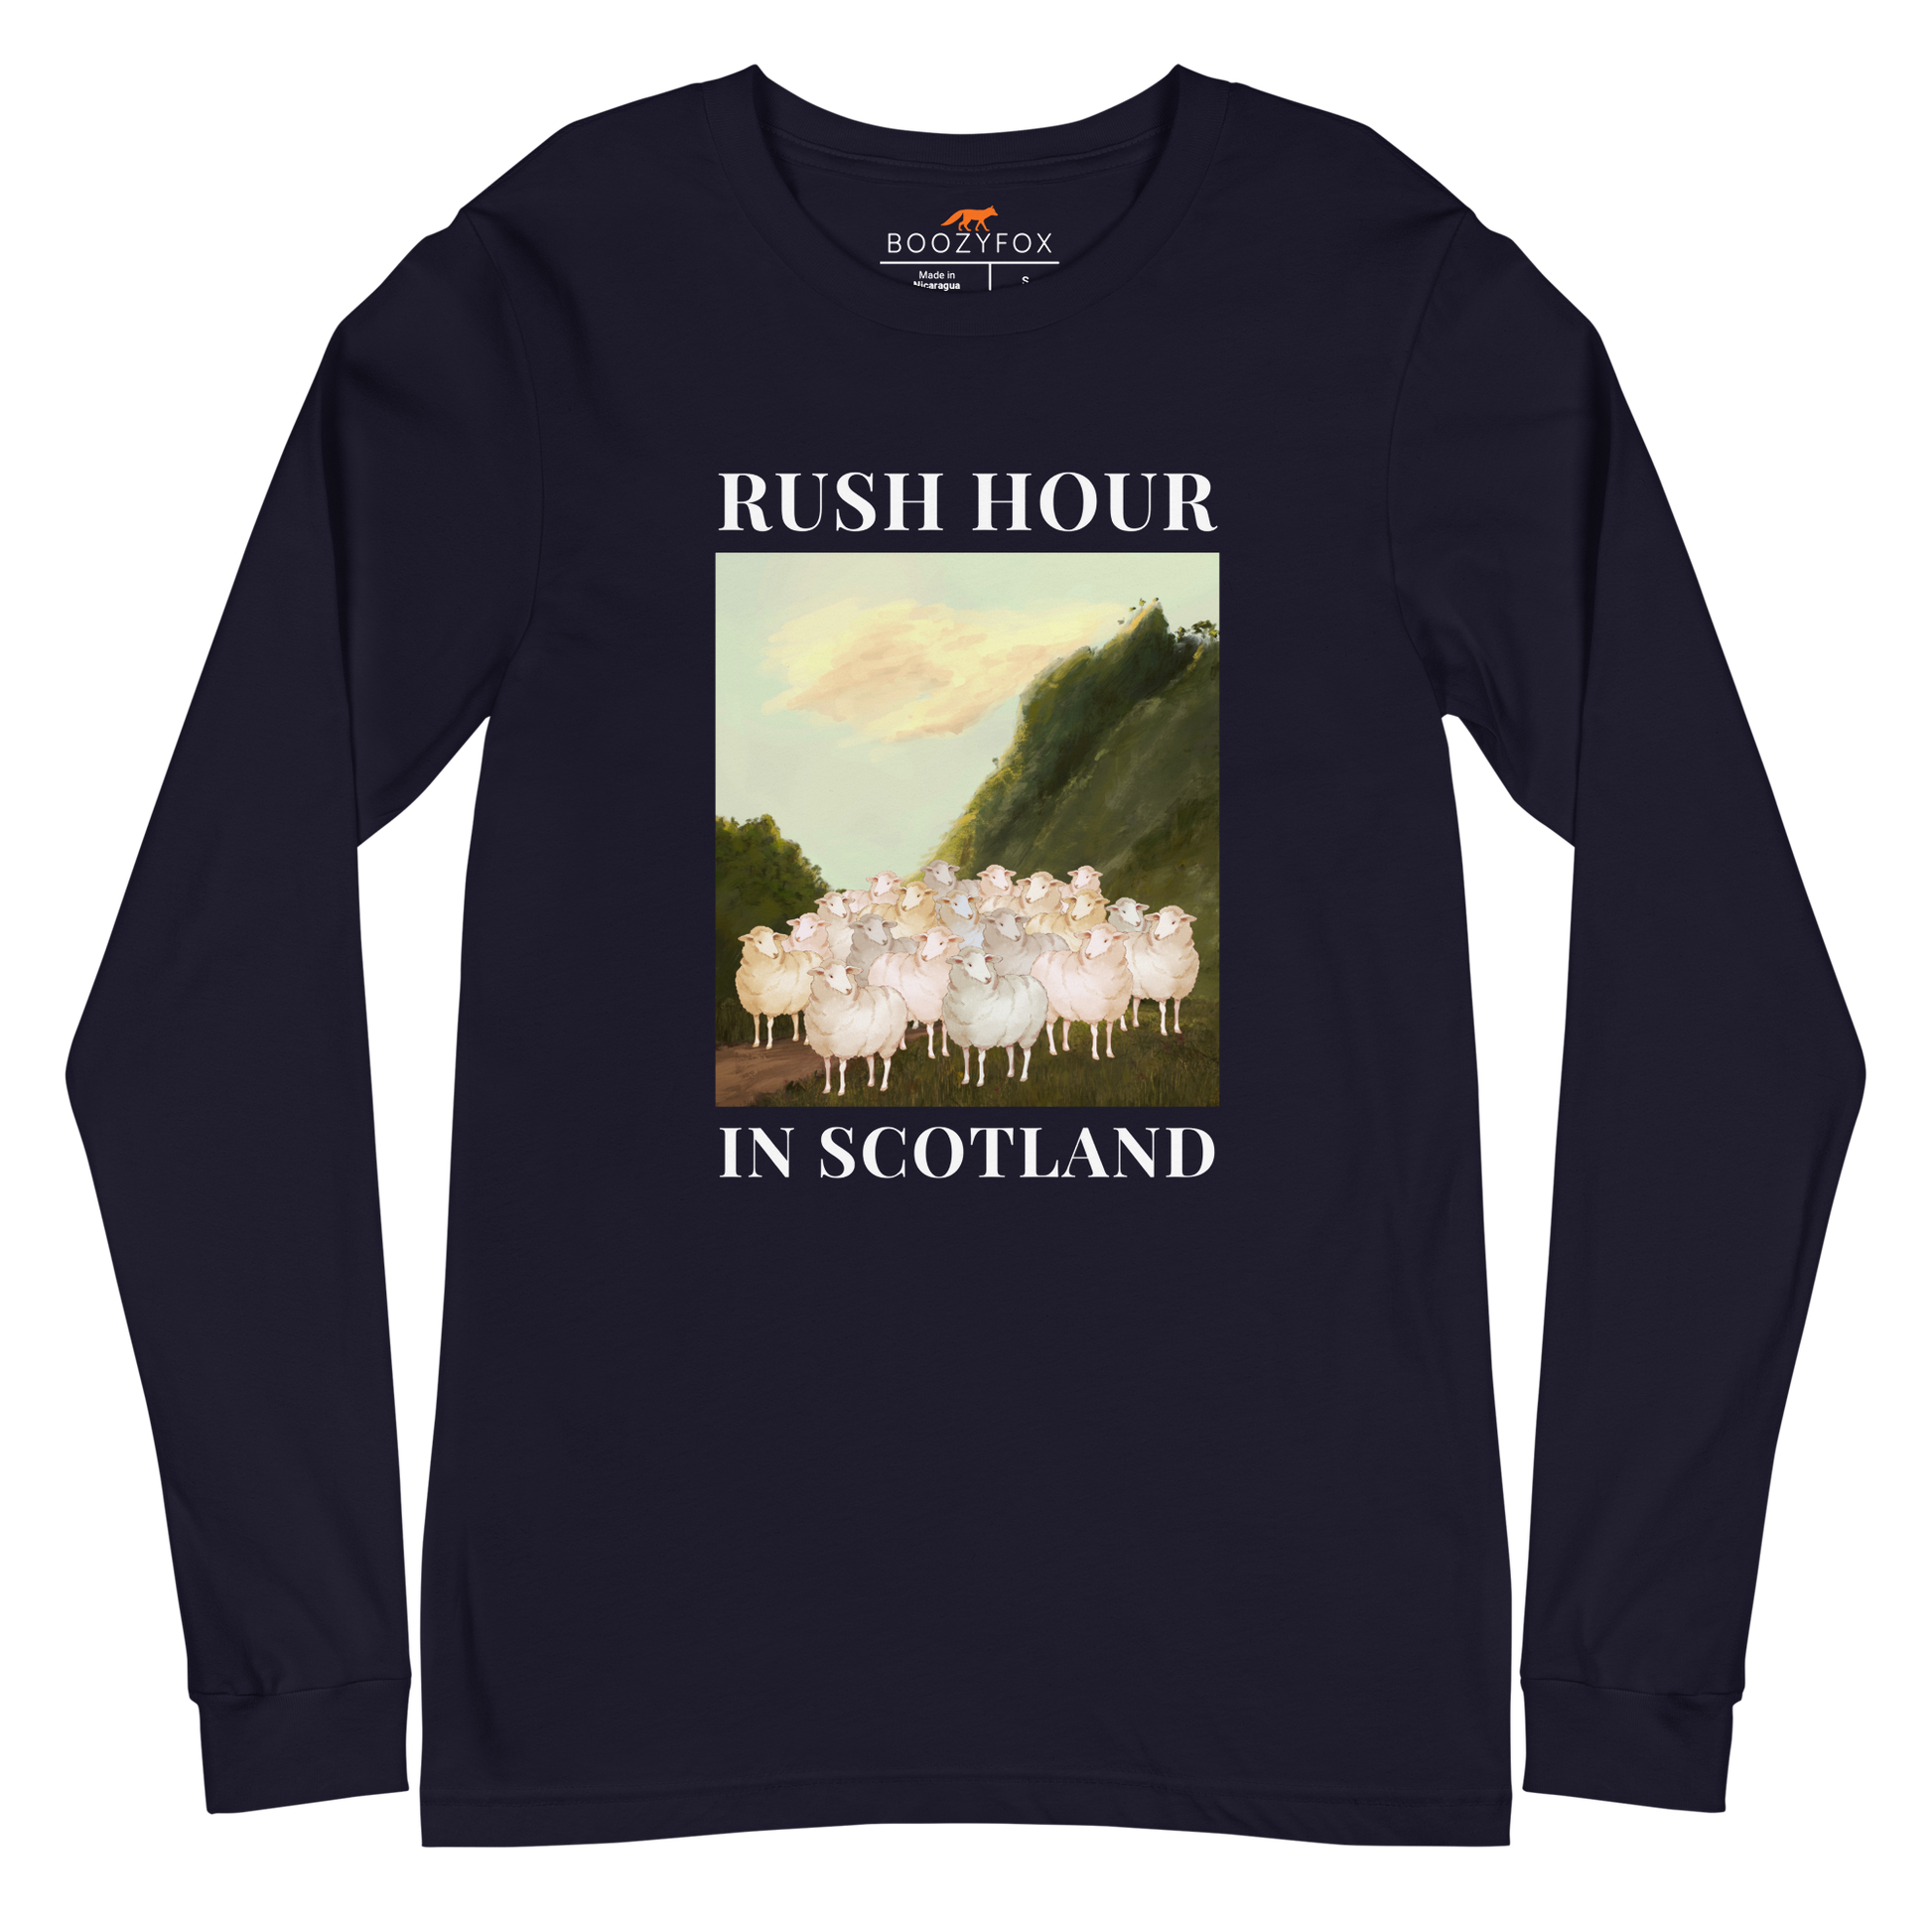 Navy Sheep Long Sleeve Tee featuring a comical Rush Hour In Scotland graphic on the chest - Artsy/Funny Sheep Long Sleeve Graphic Tees - Boozy Fox